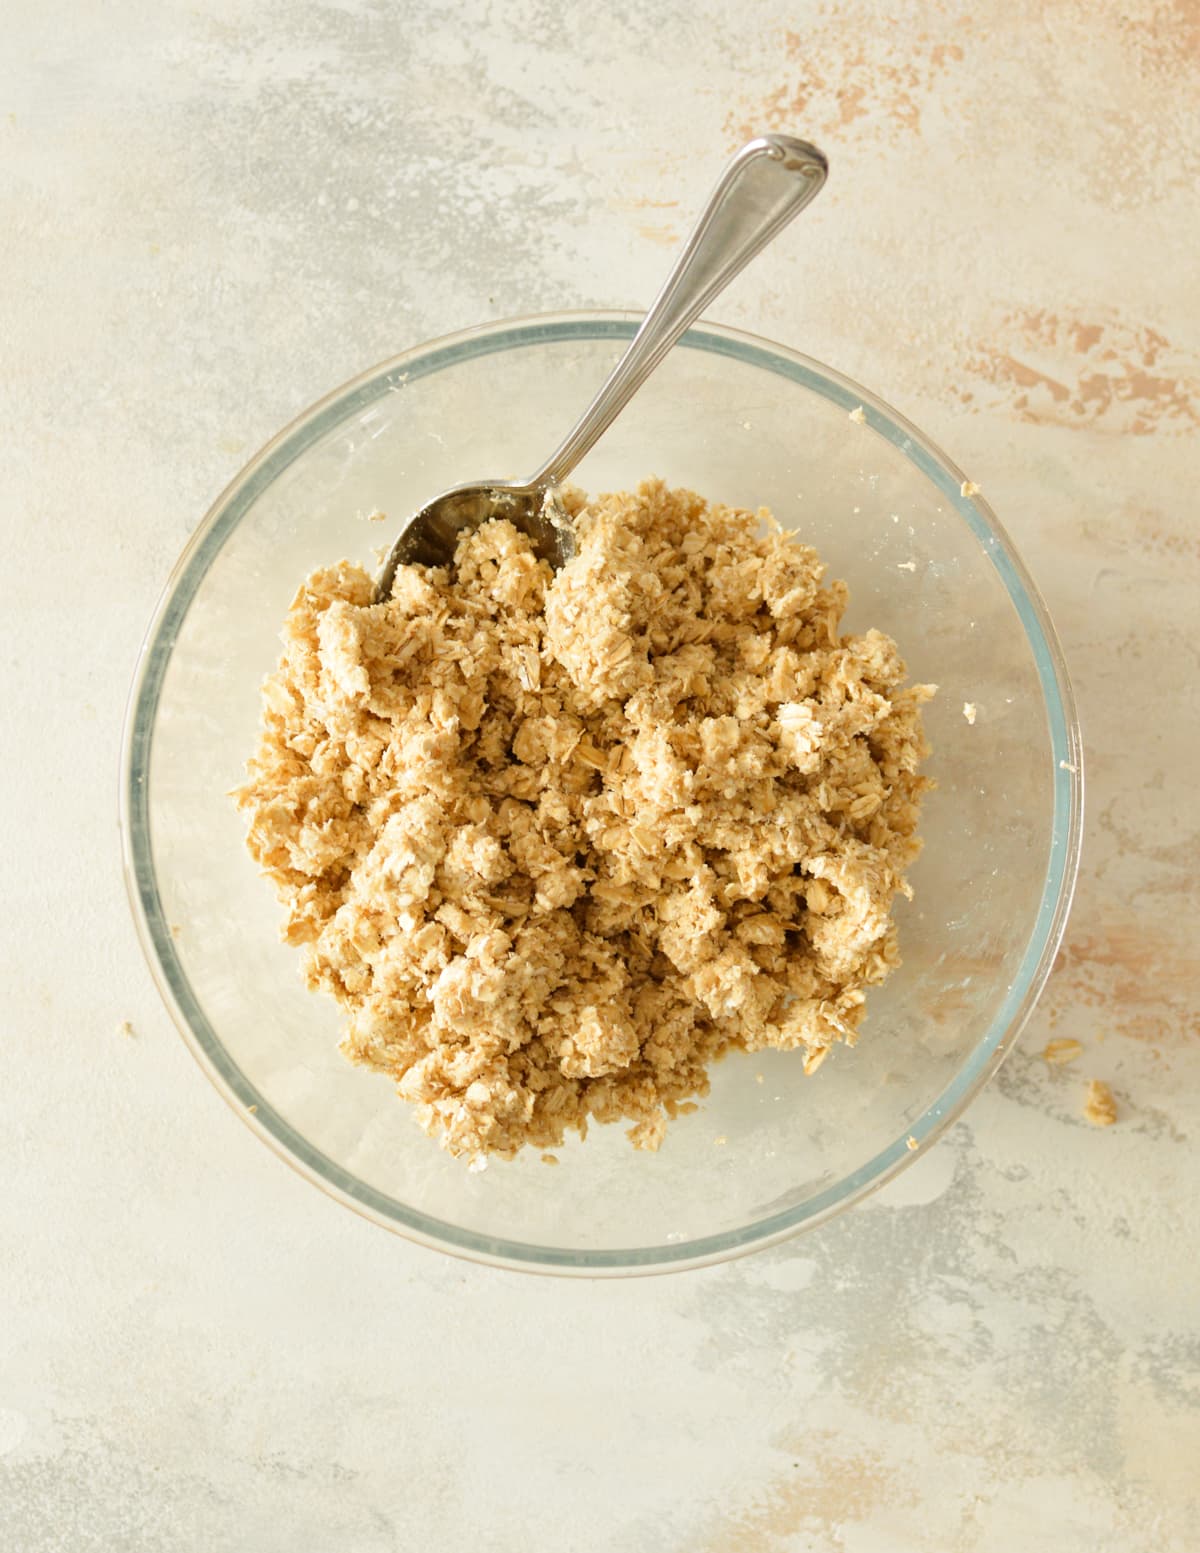 a bowl of oat crumble topping